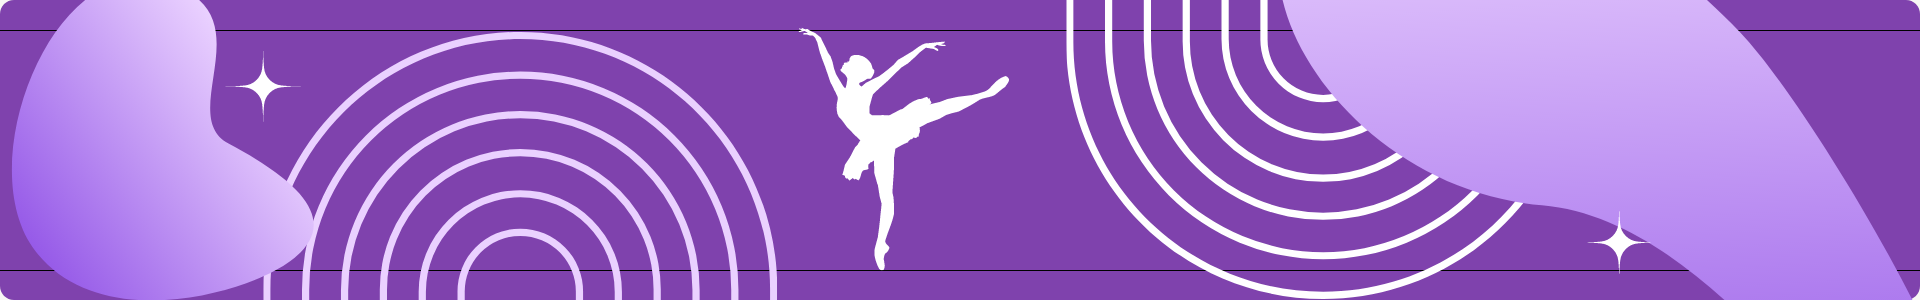 a violet banner featuring a ballerina and swirling shapes